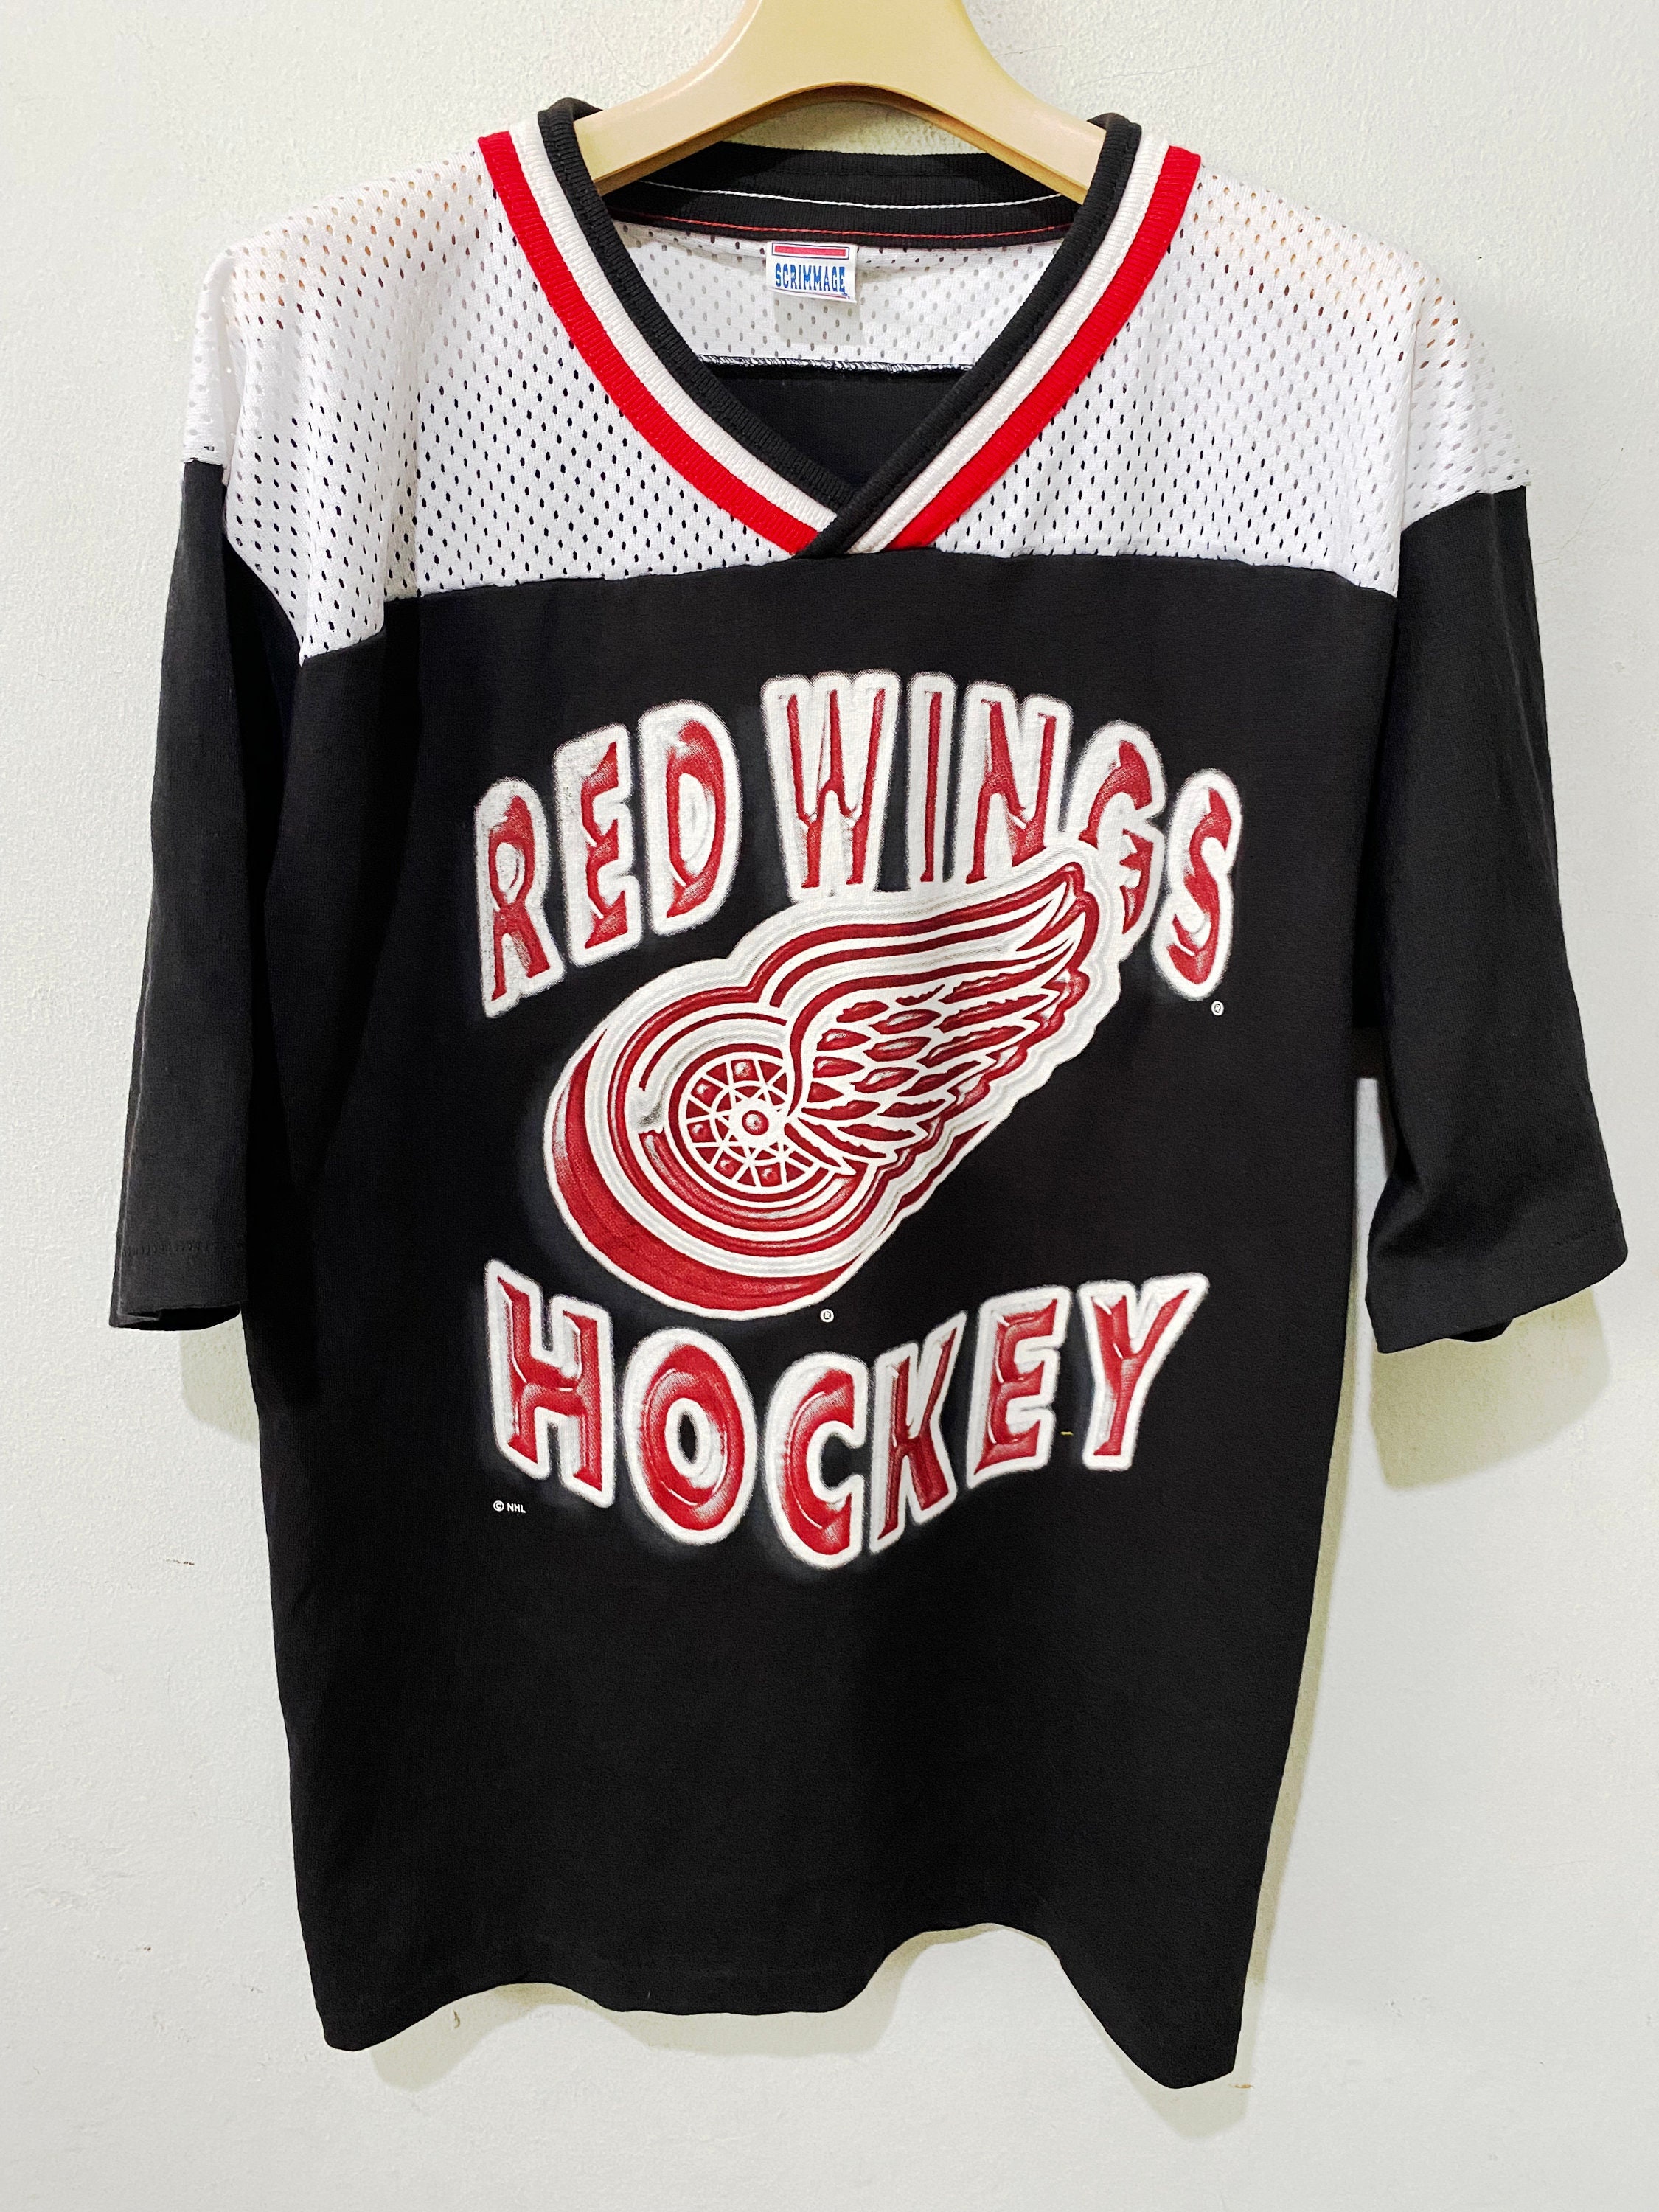 Vintage Red Wings Jerseys, Red Wings Retro Shirts & Uniforms for Sale